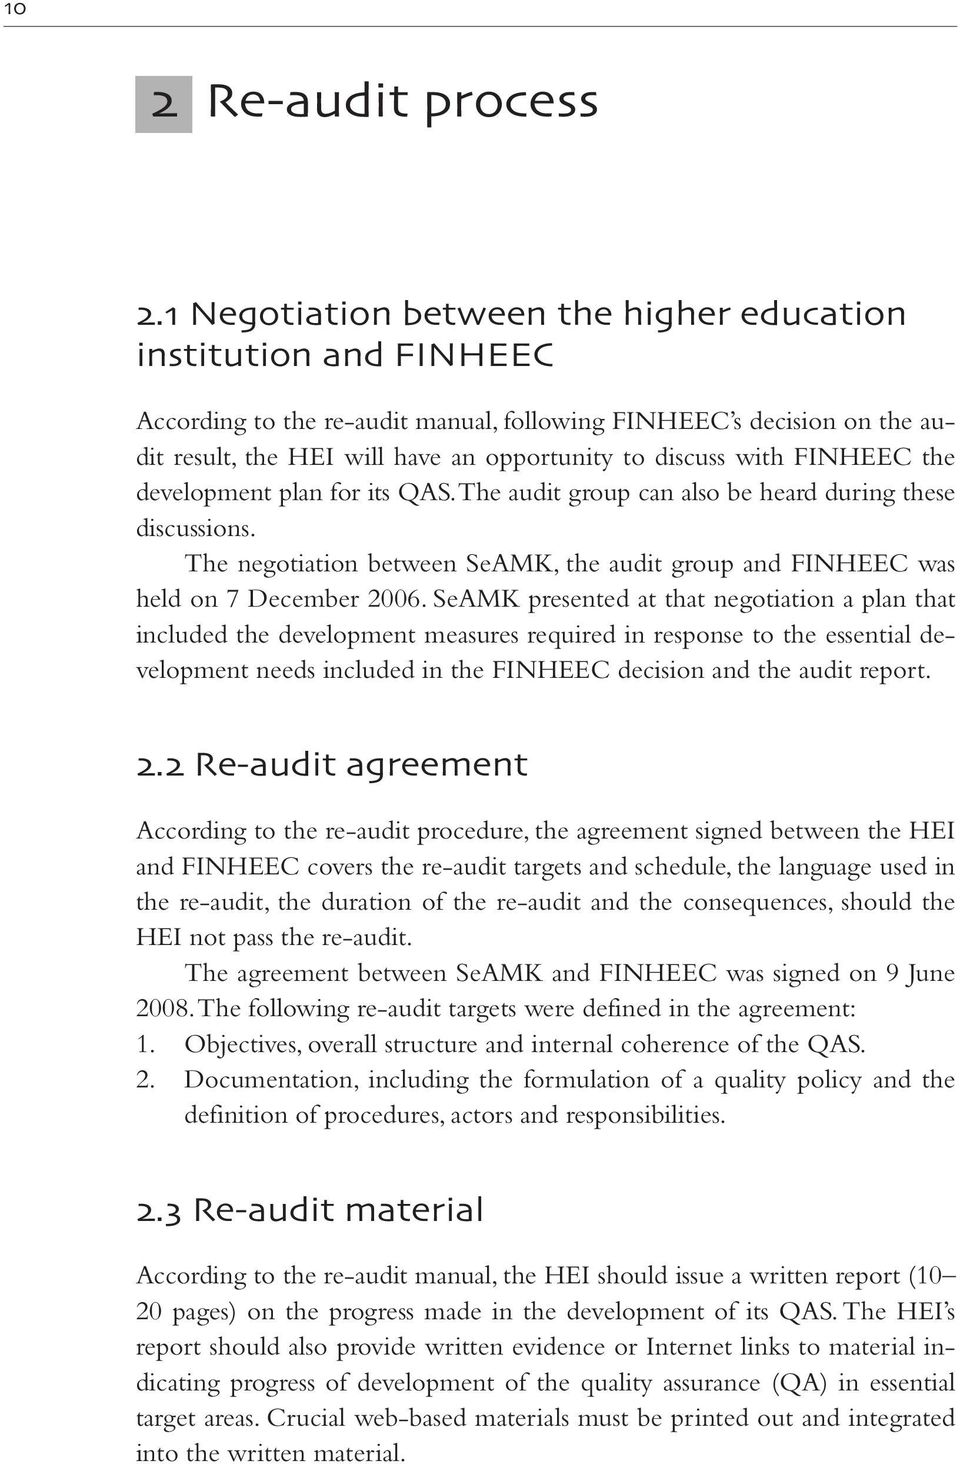 FINHEEC the development plan for its QAS. The audit group can also be heard during these discussions. The negotiation between SeAMK, the audit group and FINHEEC was held on 7 December 2006.